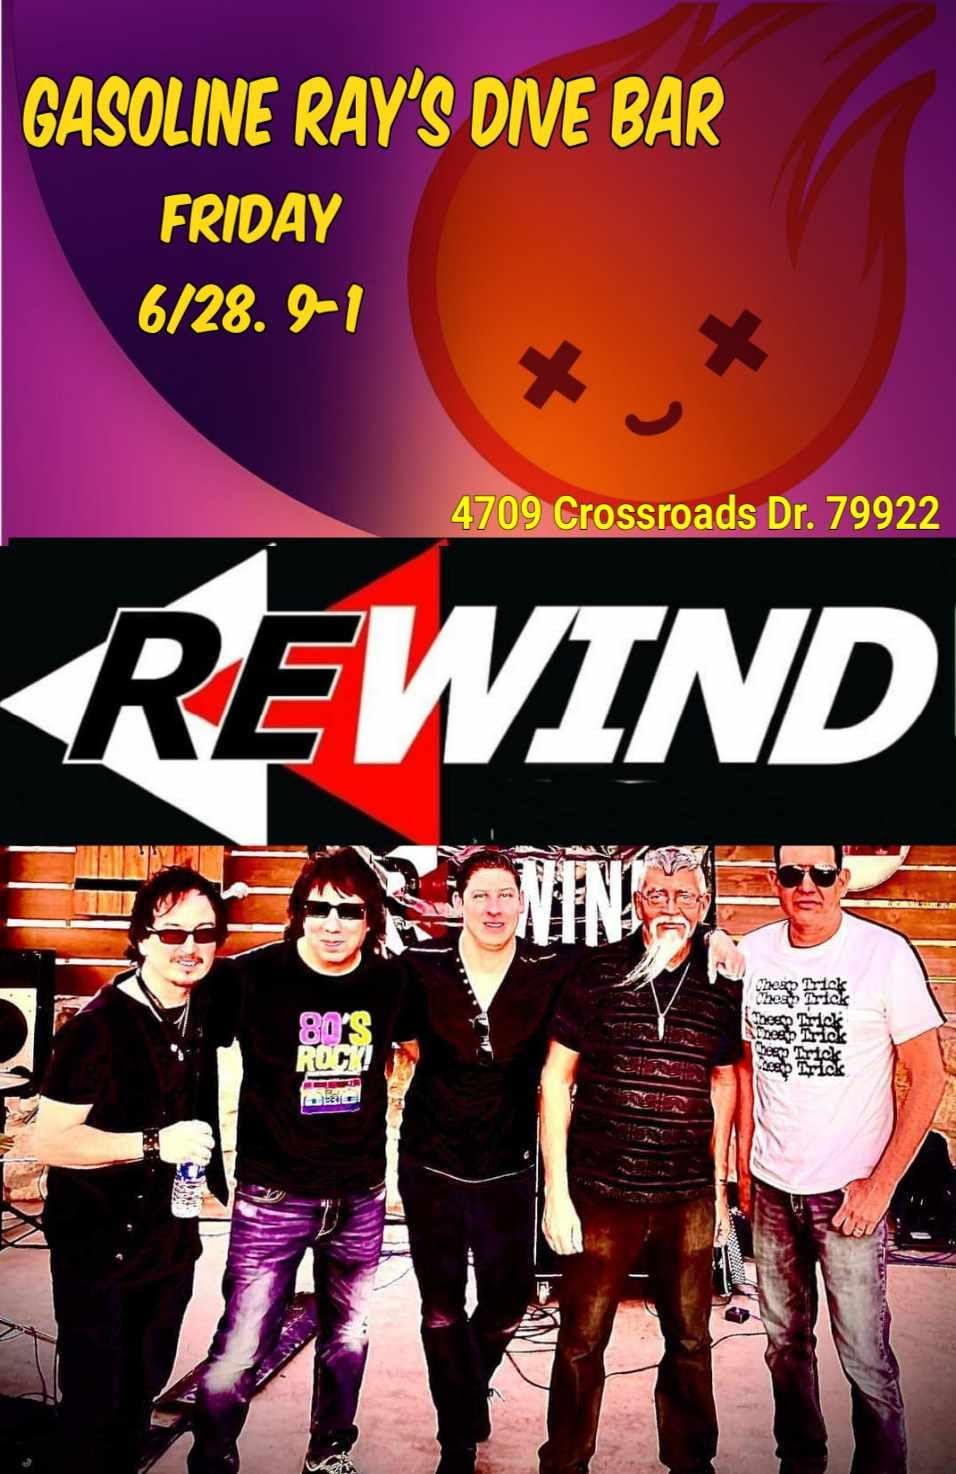 REWIND Debut  at Gasoline Ray's Dive Bar